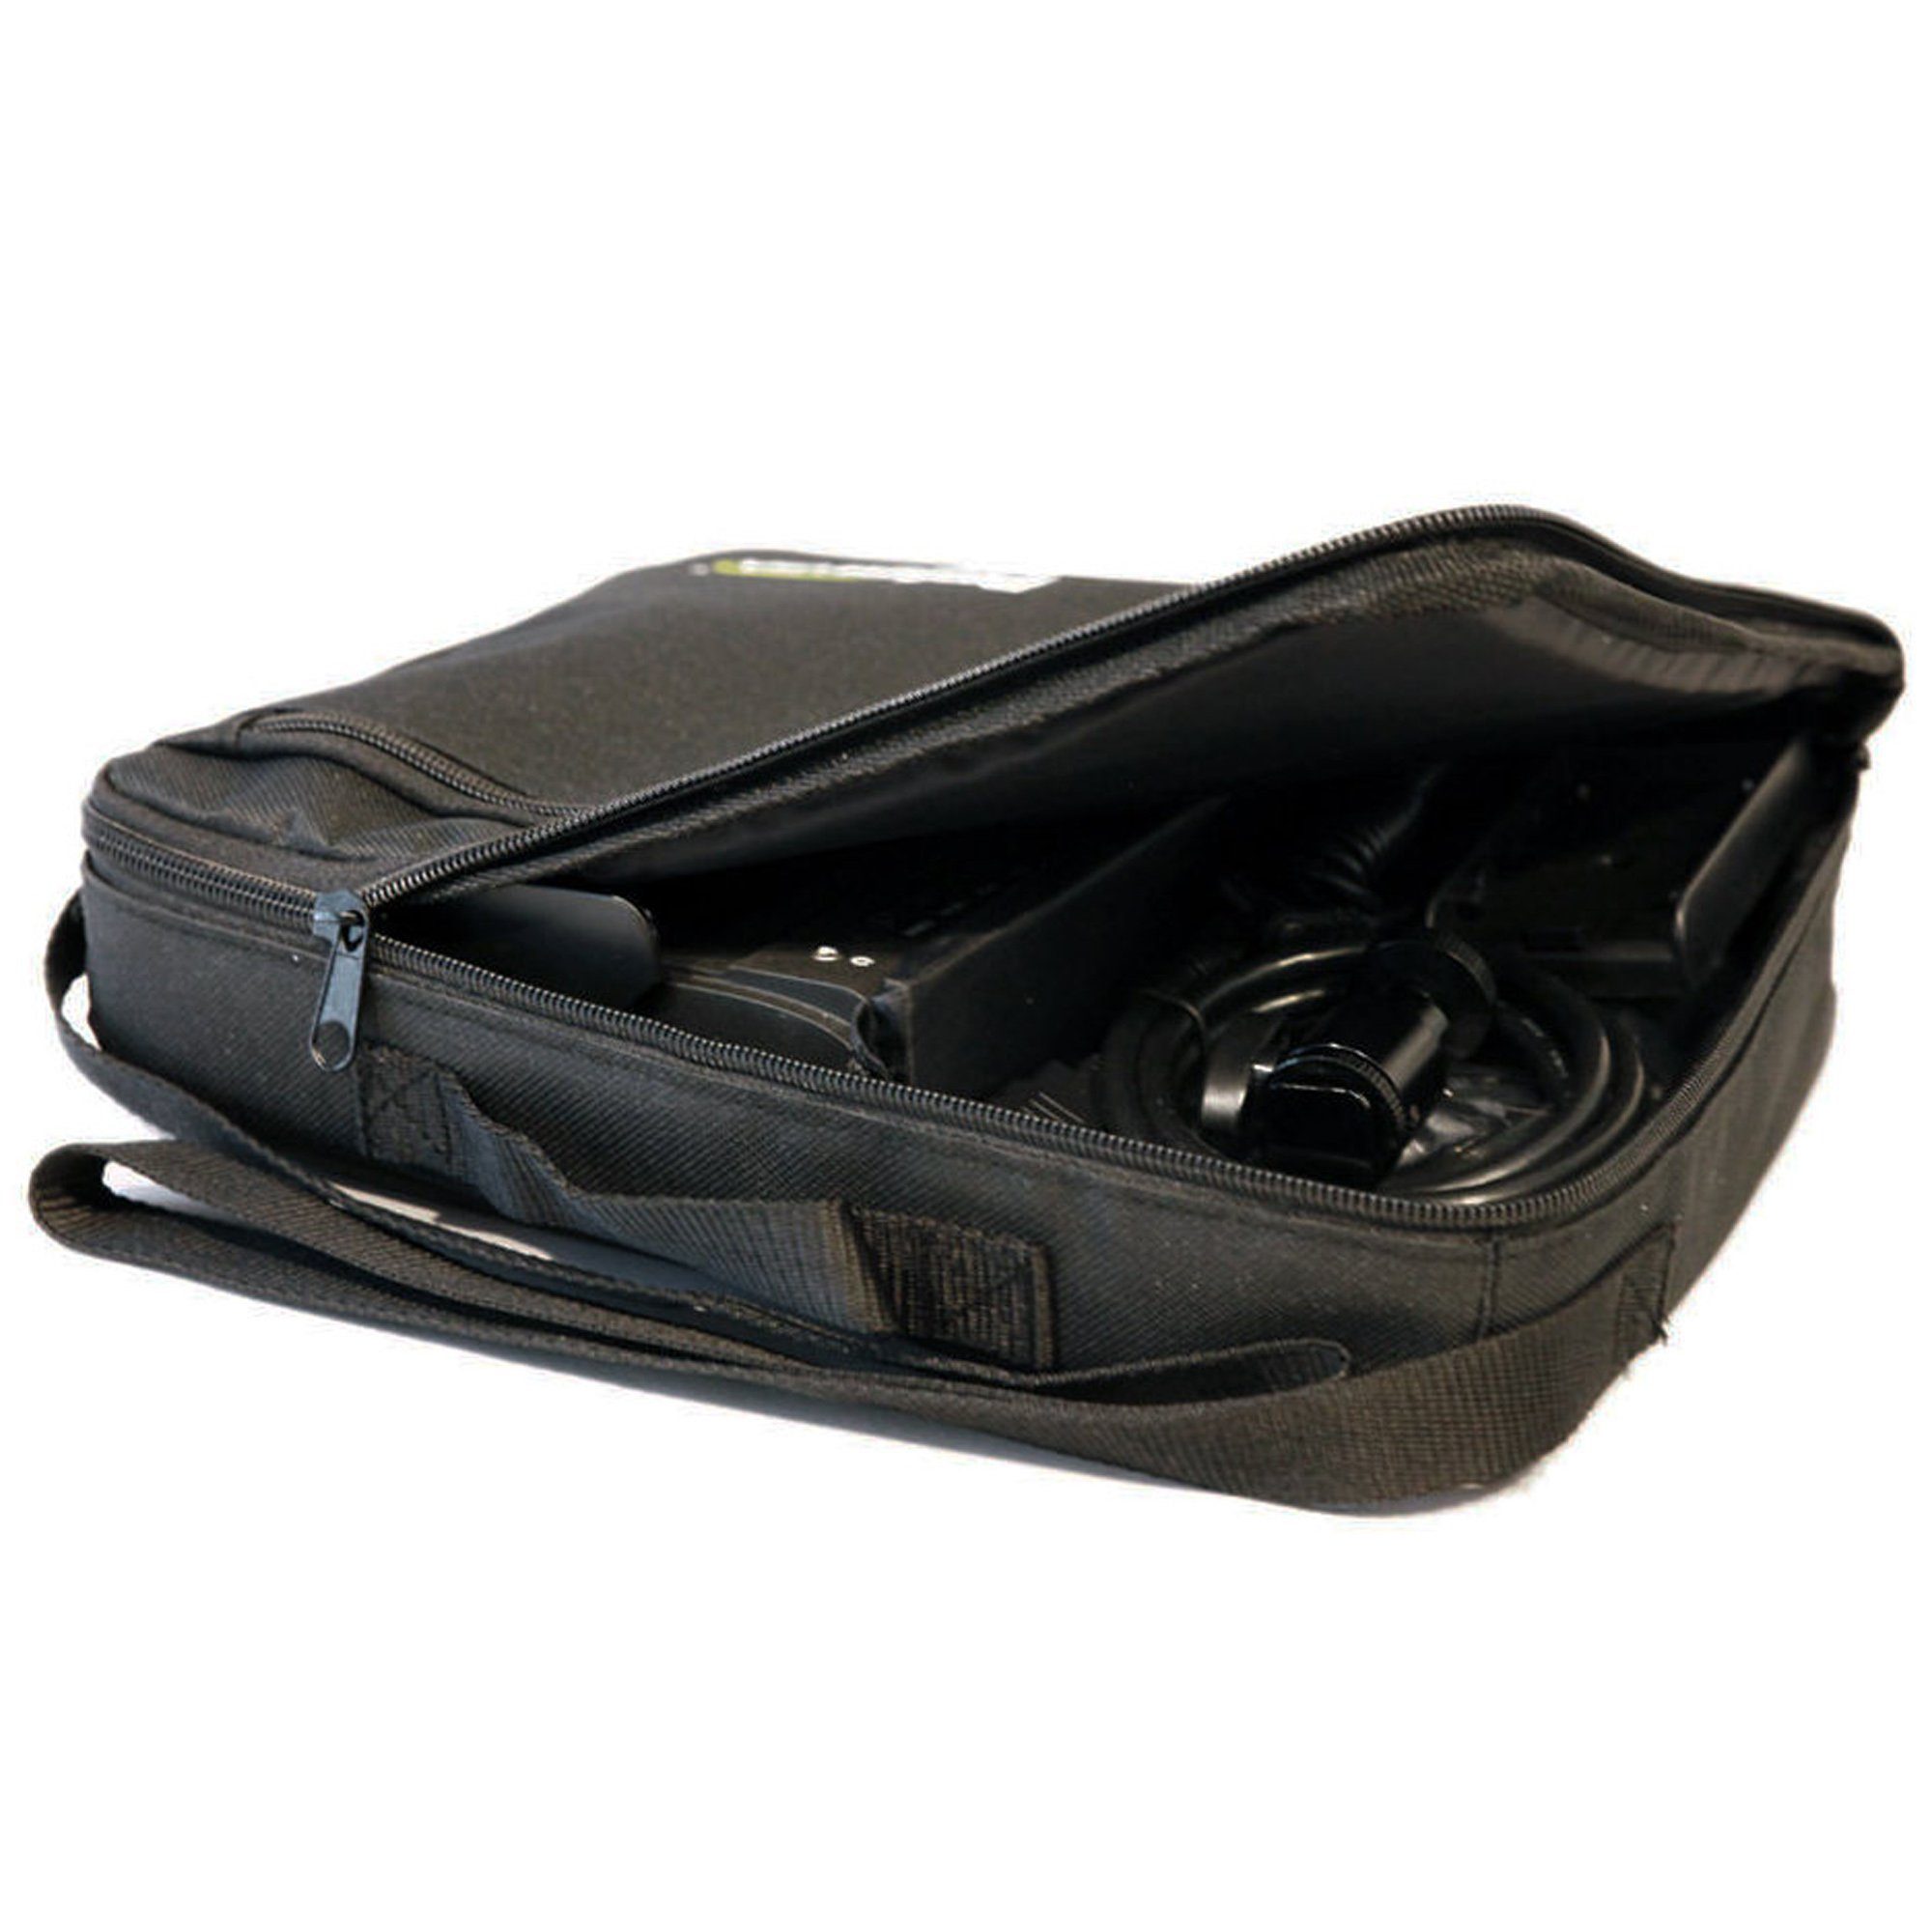 Deep Large Soft Padded Carrying Case for 5 to 7 inch LCD Video Monitors - PRODUCTS